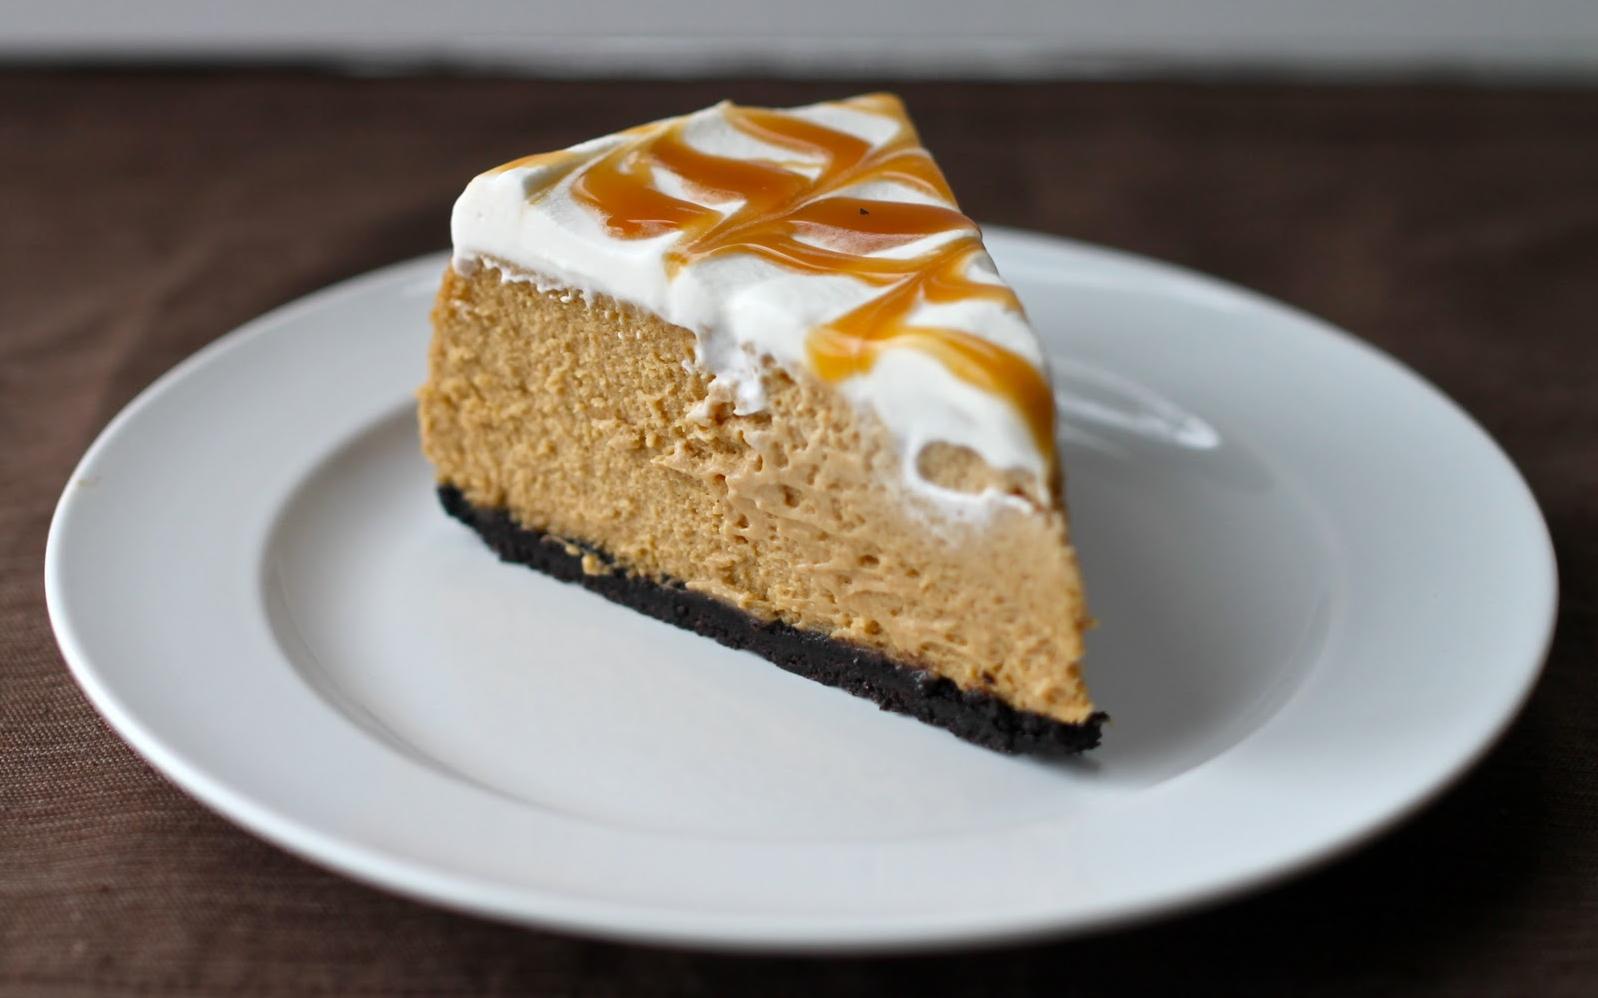  Take a slice and top it off with whipped cream and drizzle of caramel sauce.